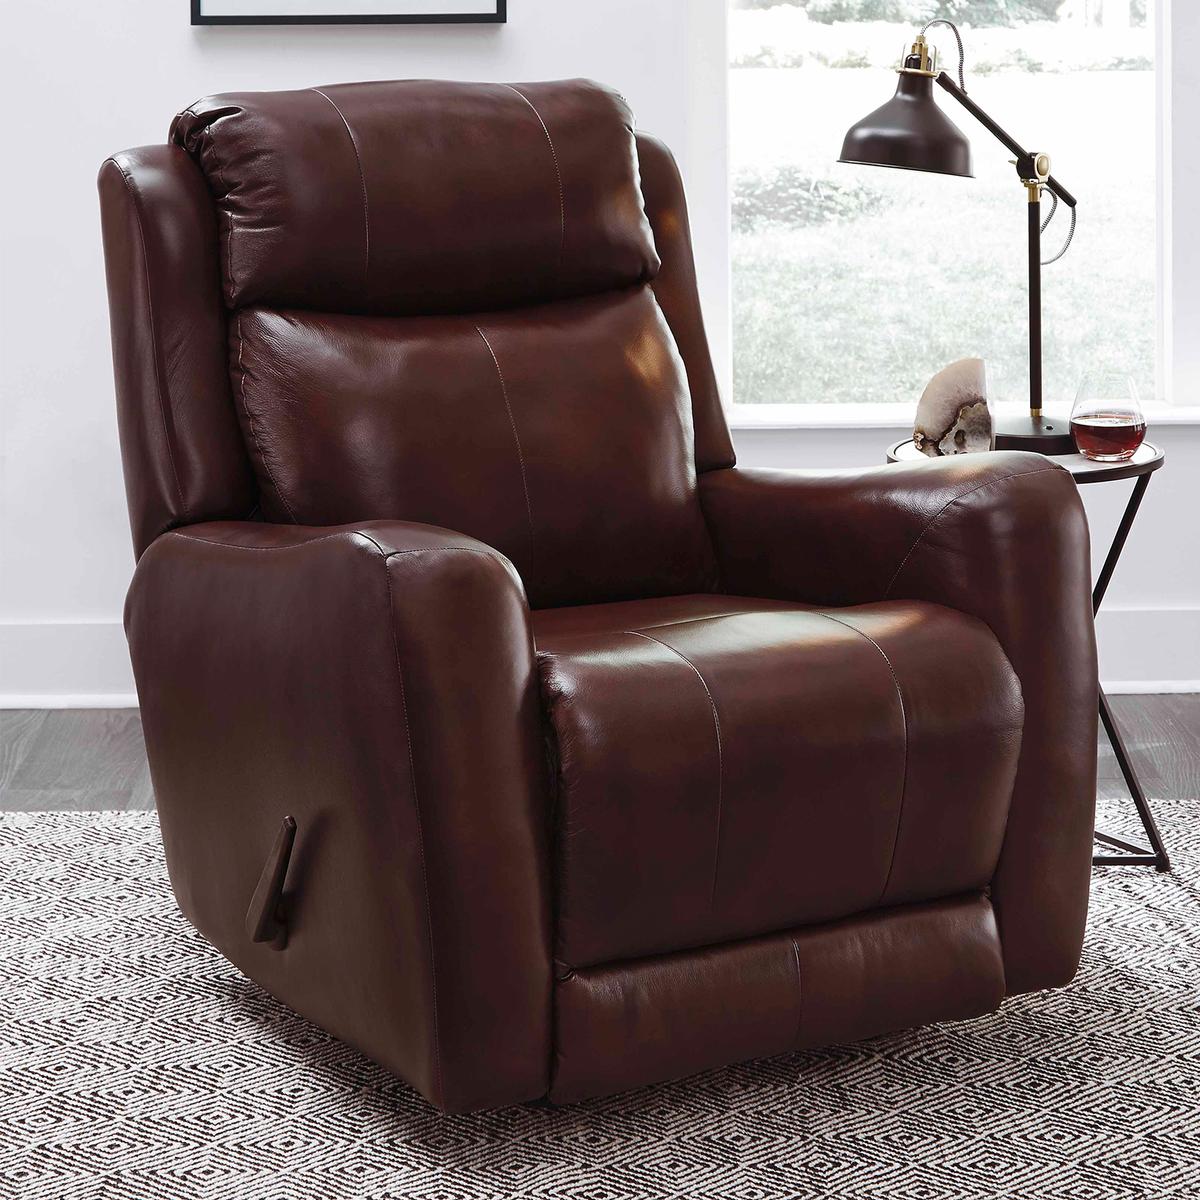 Southern Motion View Point Rocker Recliner